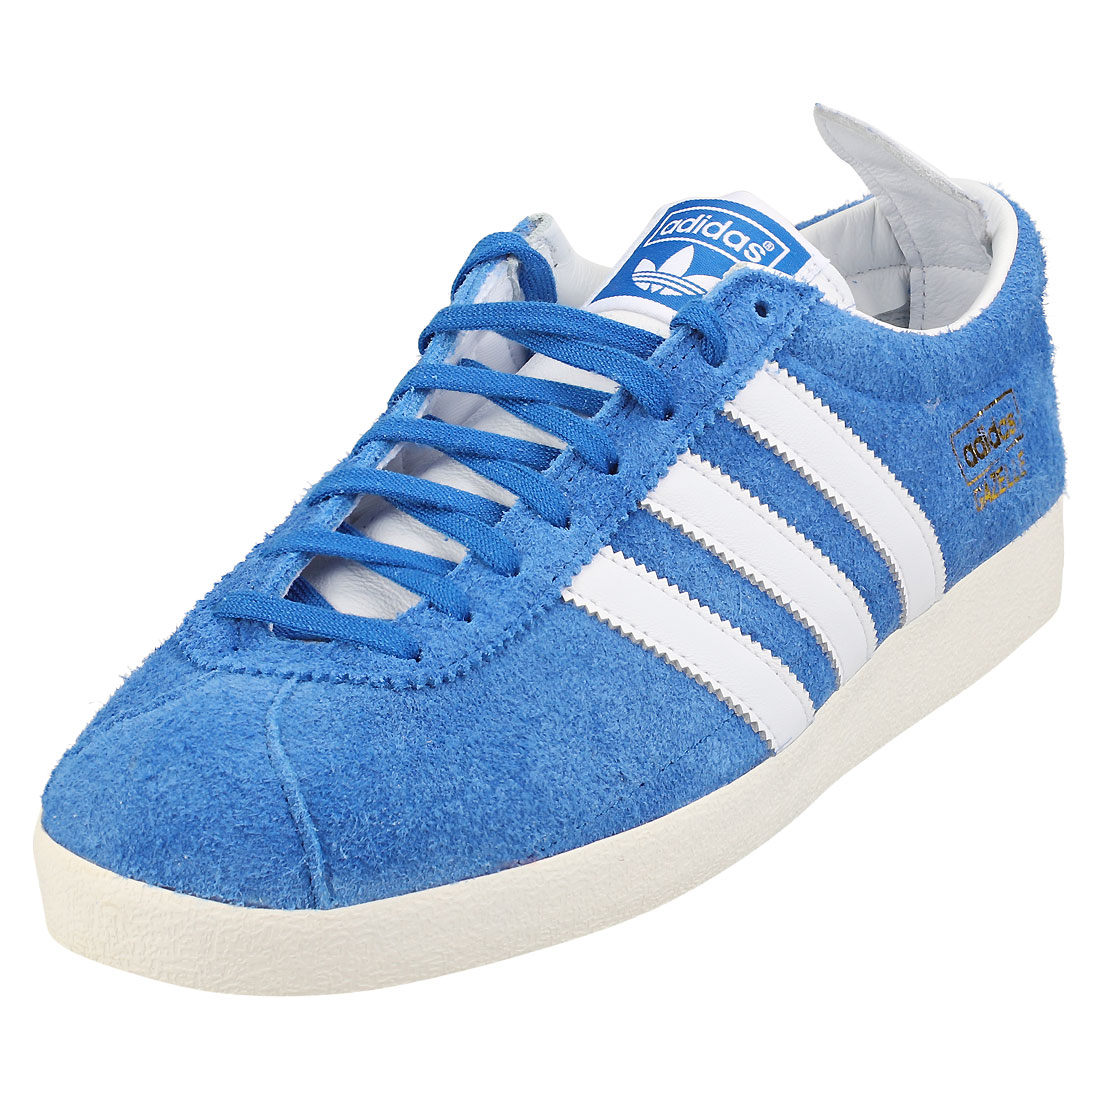 adidas Gazelle Vintage Mens Blue White Suede Casual Trainers | eBay